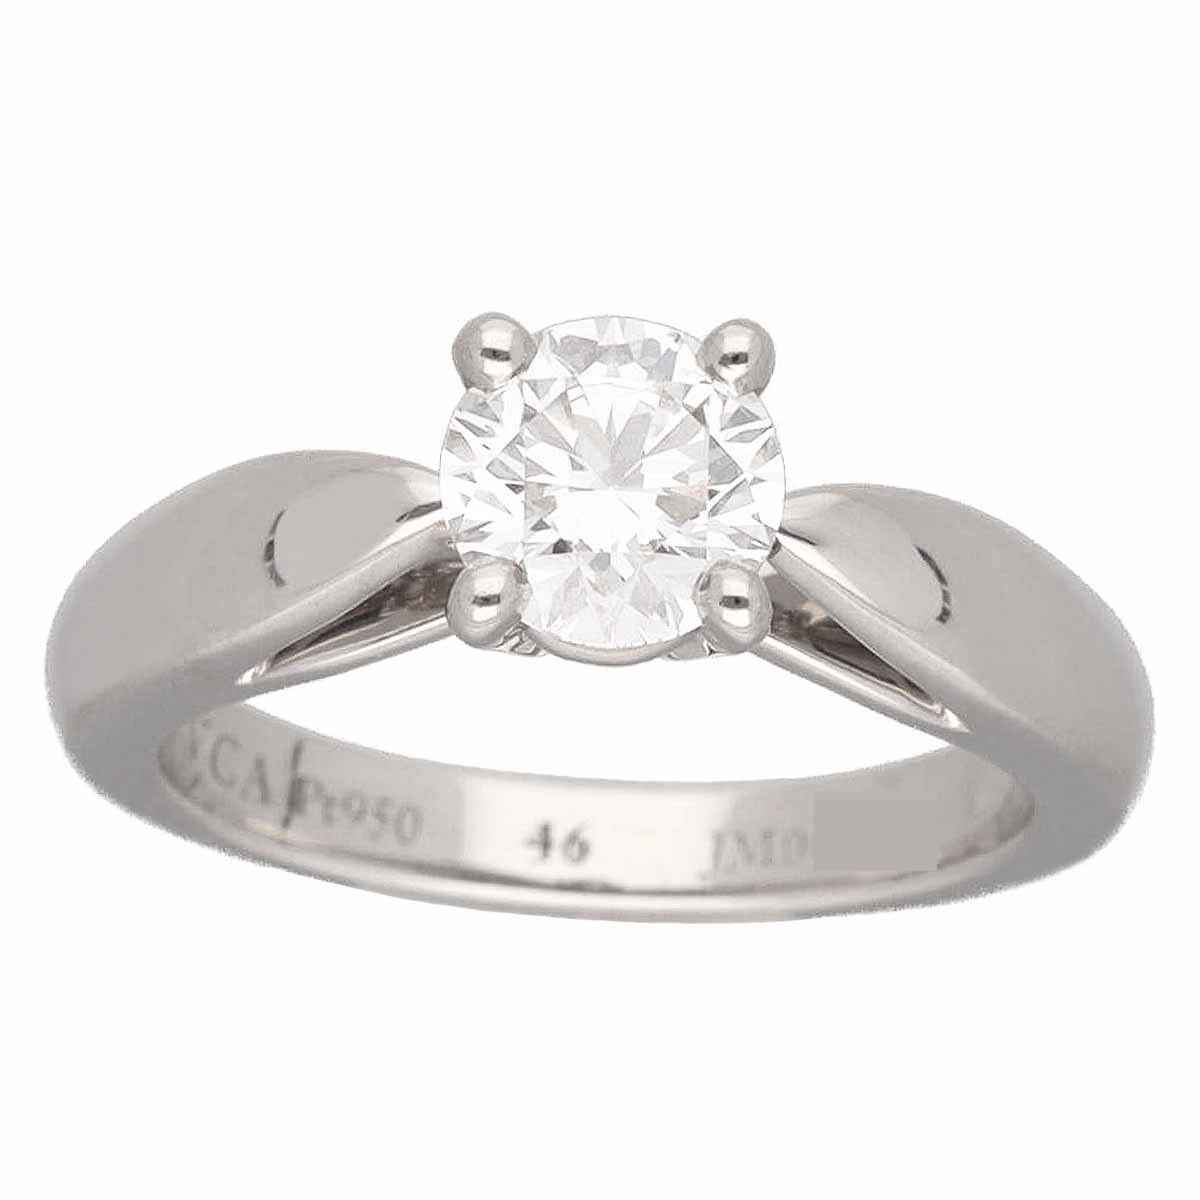 Brand:Van Cleef&Arpels
Name:Bonheur Solitaire Ring
Material:1P diamond (D0.71ct E-VVS2-3Ex), Pt950 Platinum
Weight:6.3g（Approx)
Ring size:British & Australian:G 1/2  /   US & Canada:3 3/4 /  French & Russian:46 /  German:14.7 /  Japanese:  6 /Swiss: